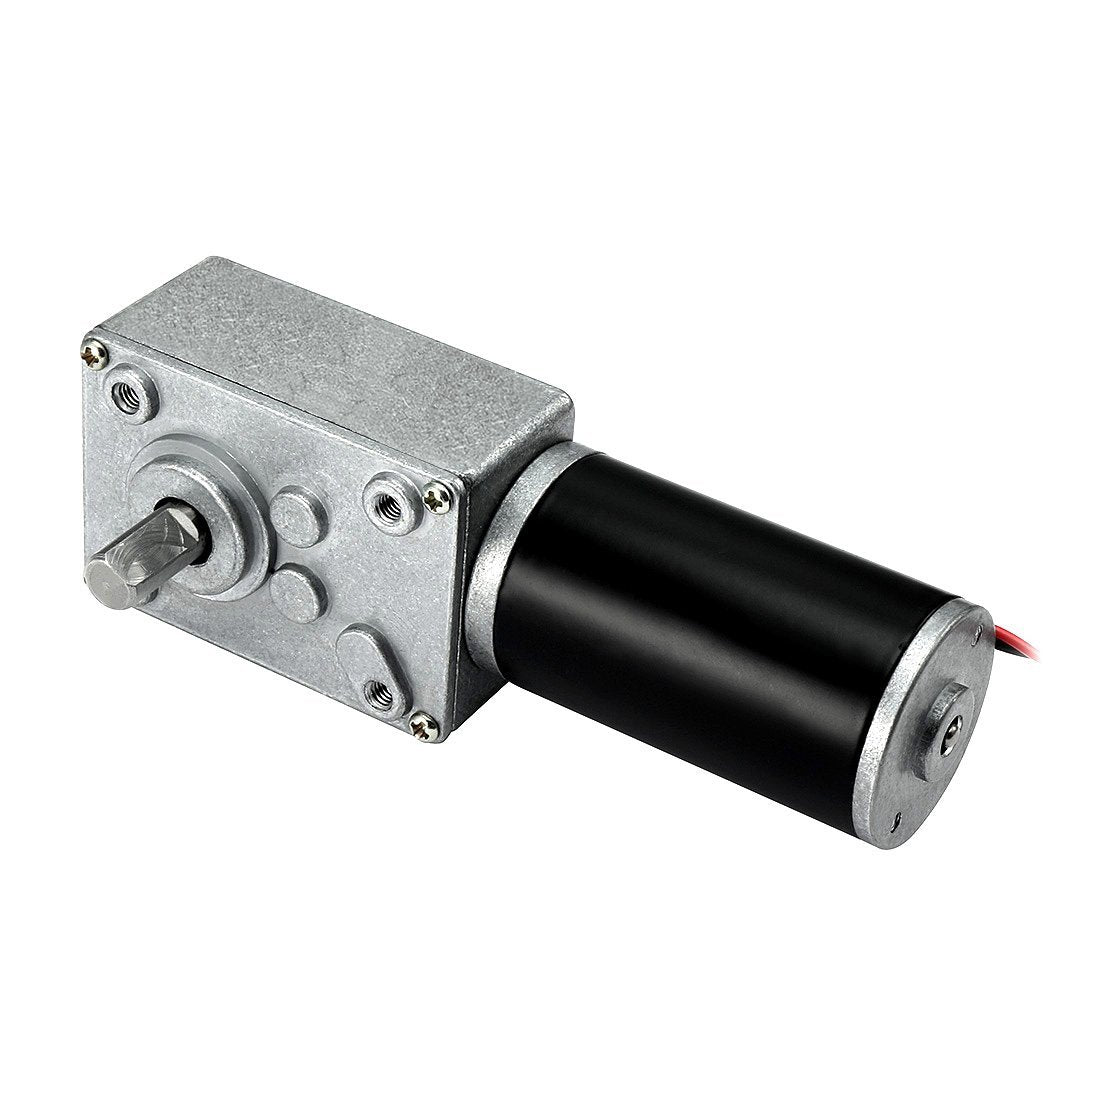 uxcell Uxcell DC 24V 20RPM High Torque Electric Power Speed Reduce Turbine Worm Gear Box Motor